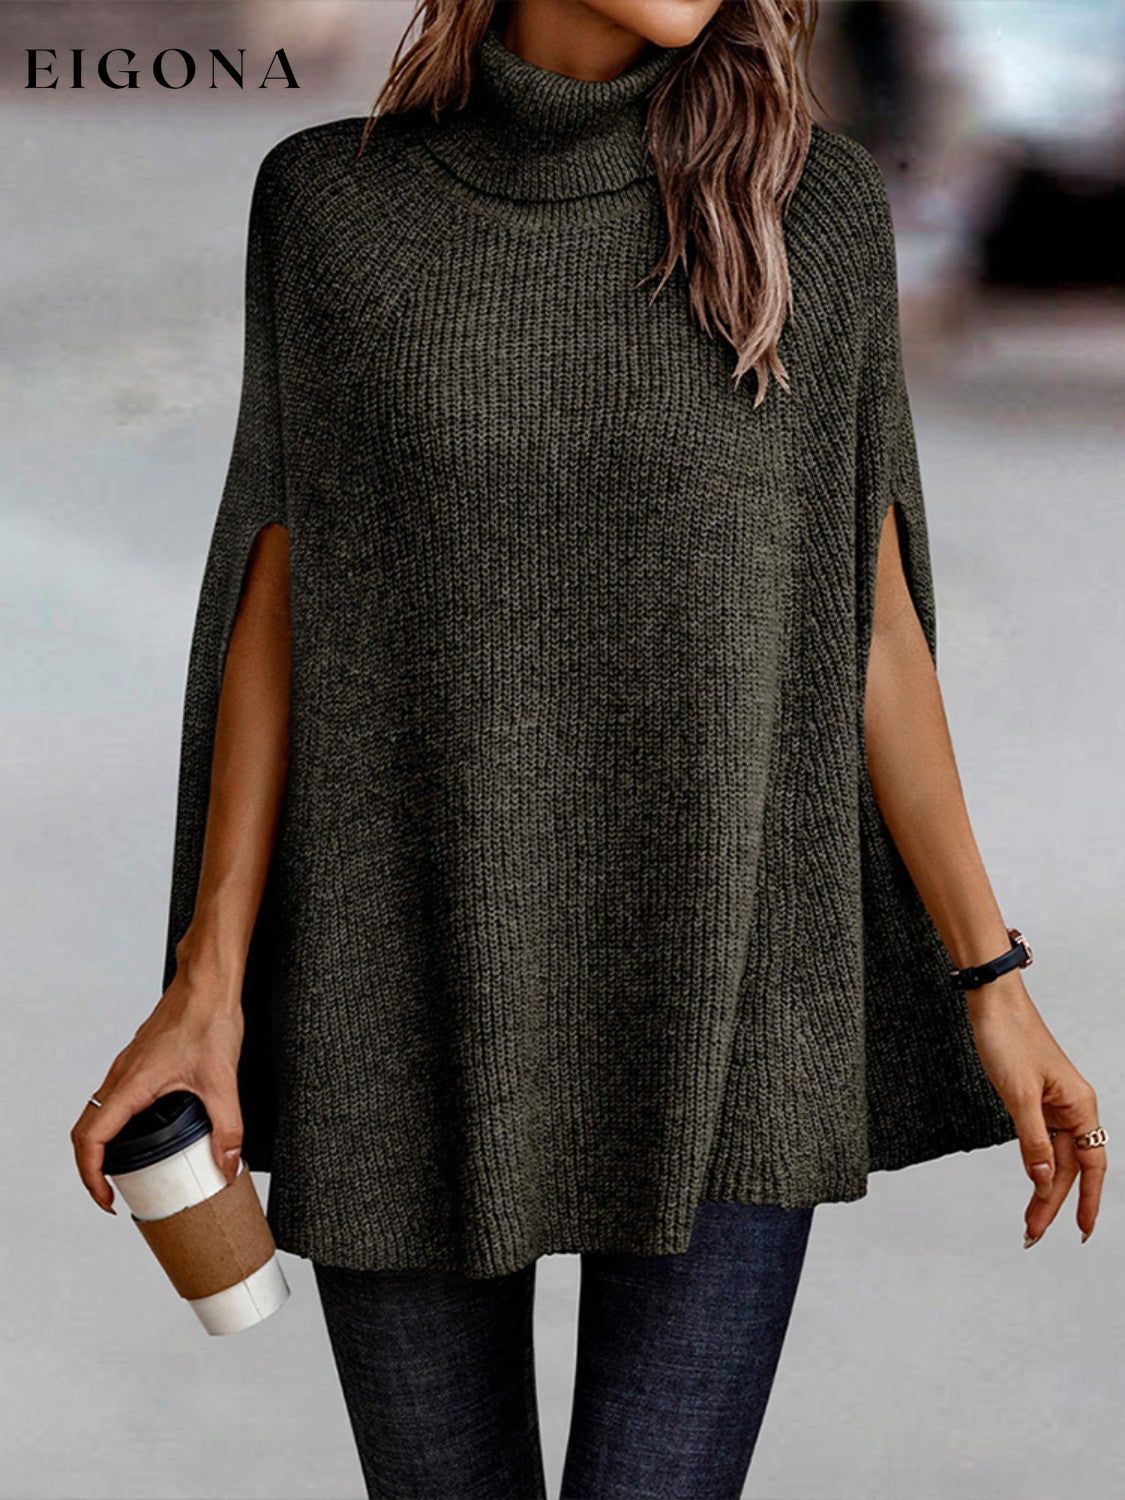 Turtleneck Dolman Sleeve Poncho Fashion Sweater Black Forest clothes long sleeve Romantichut Ship From Overseas Shipping Delay 09/29/2023 - 10/04/2023 Sweater sweaters turtleneck